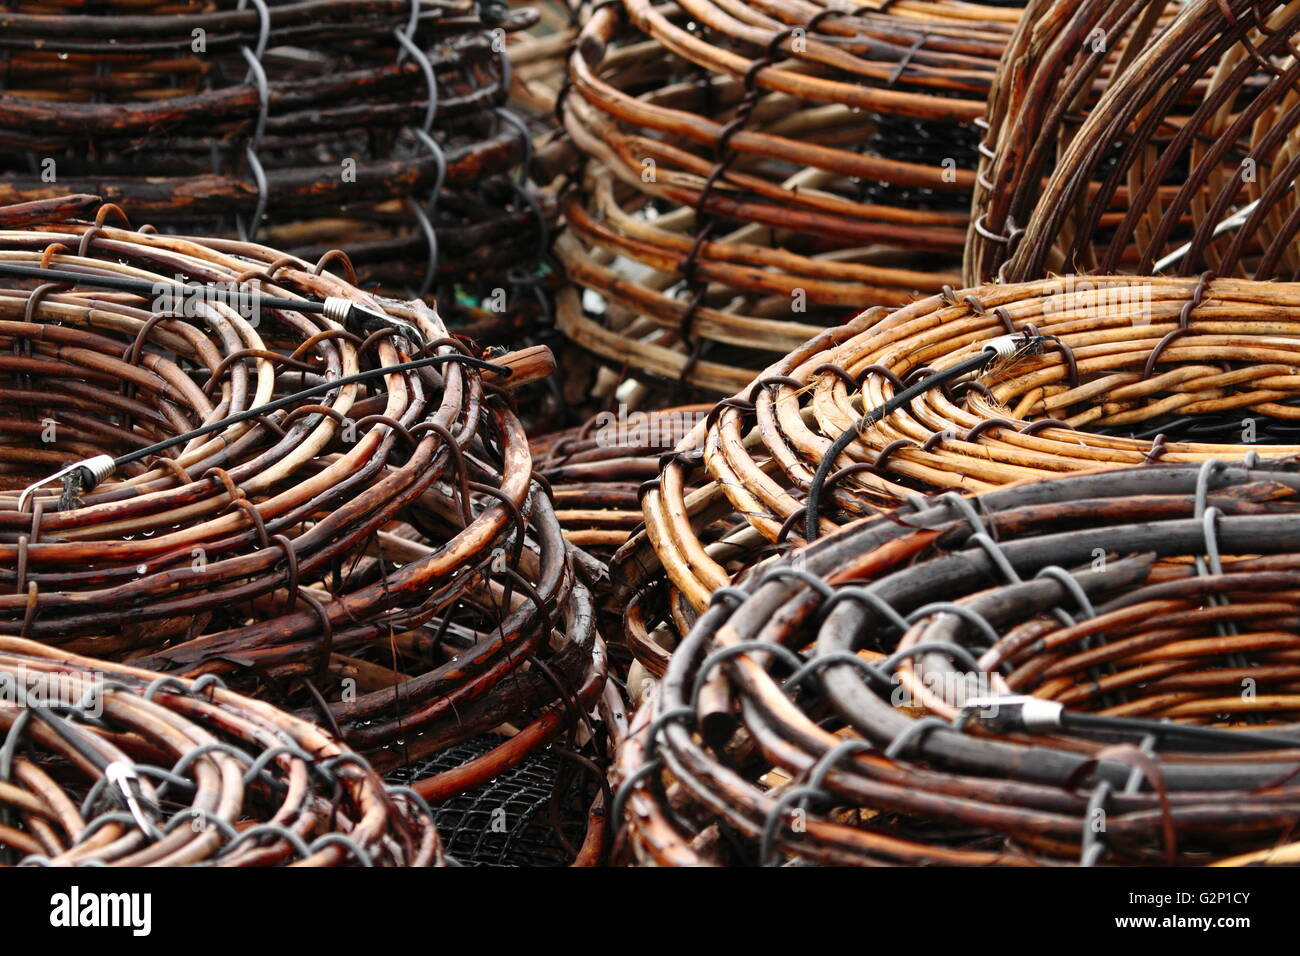 Rock Lobster Pots stacked on the deck of a fishing boat in Constitution Dock, Hobart, Tasmania, Australia. Stock Photo